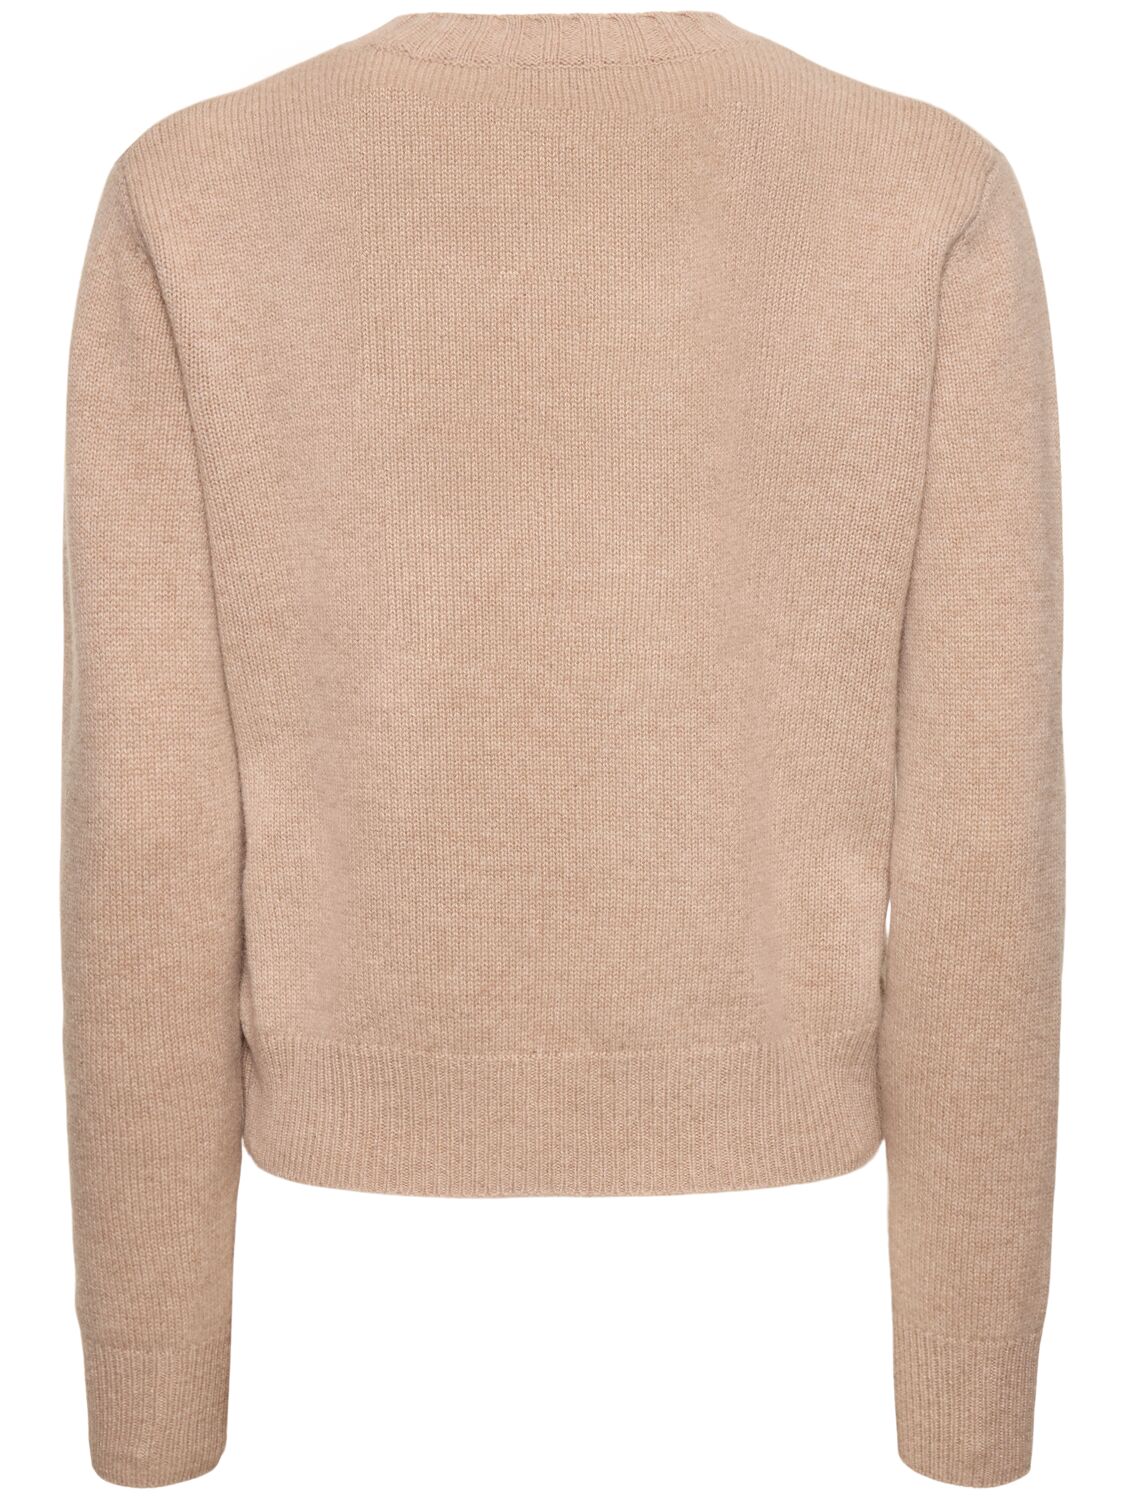 Shop Sporty And Rich Vendome Cashmere Crewneck Sweater In Beige